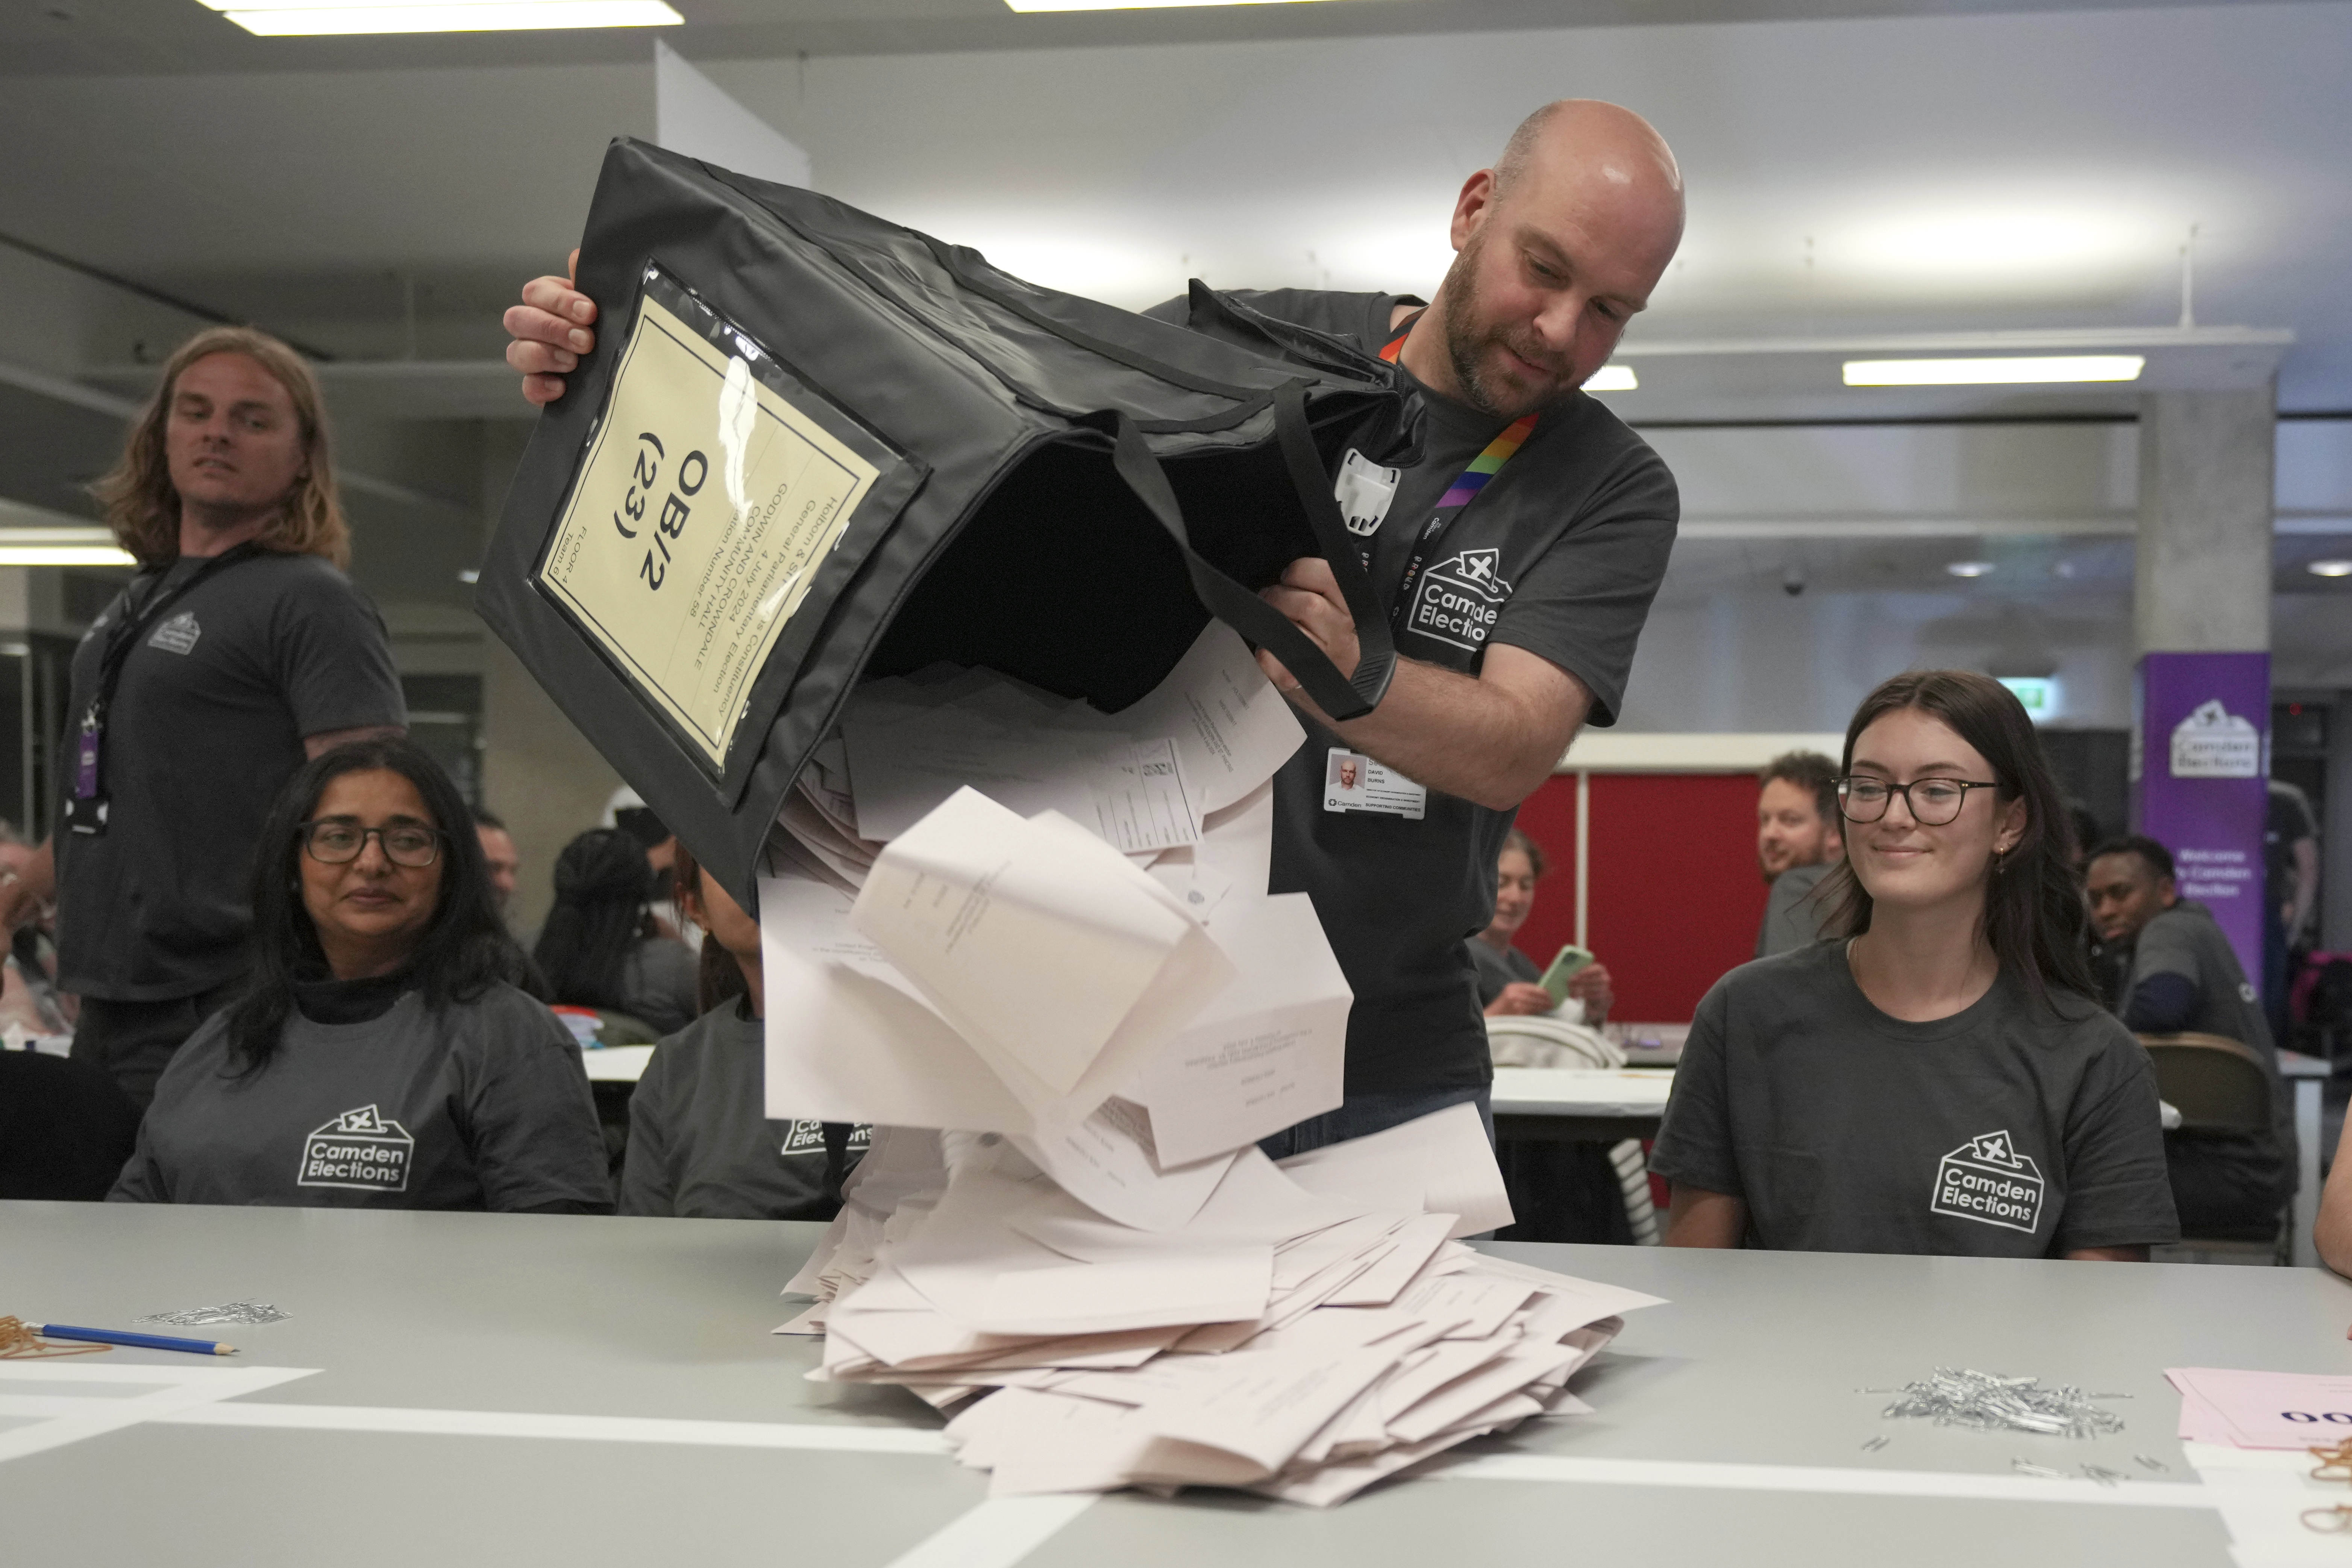 Boxes of votes are emptied ready to be counted for the British Parliamentary constituency of Holborn and St Pancras where the Labour Party leader Keir Starmer is standing for election, in London, Thursday, July 4, 2024. Britain's Labour Party appears to be headed for a huge majority in the 2024 UK election, an exit poll suggested. The poll released moments after voting closed indicated that Labour leader Keir Starmer will be the country's next prime minister. (AP Photo/Kin Cheung)